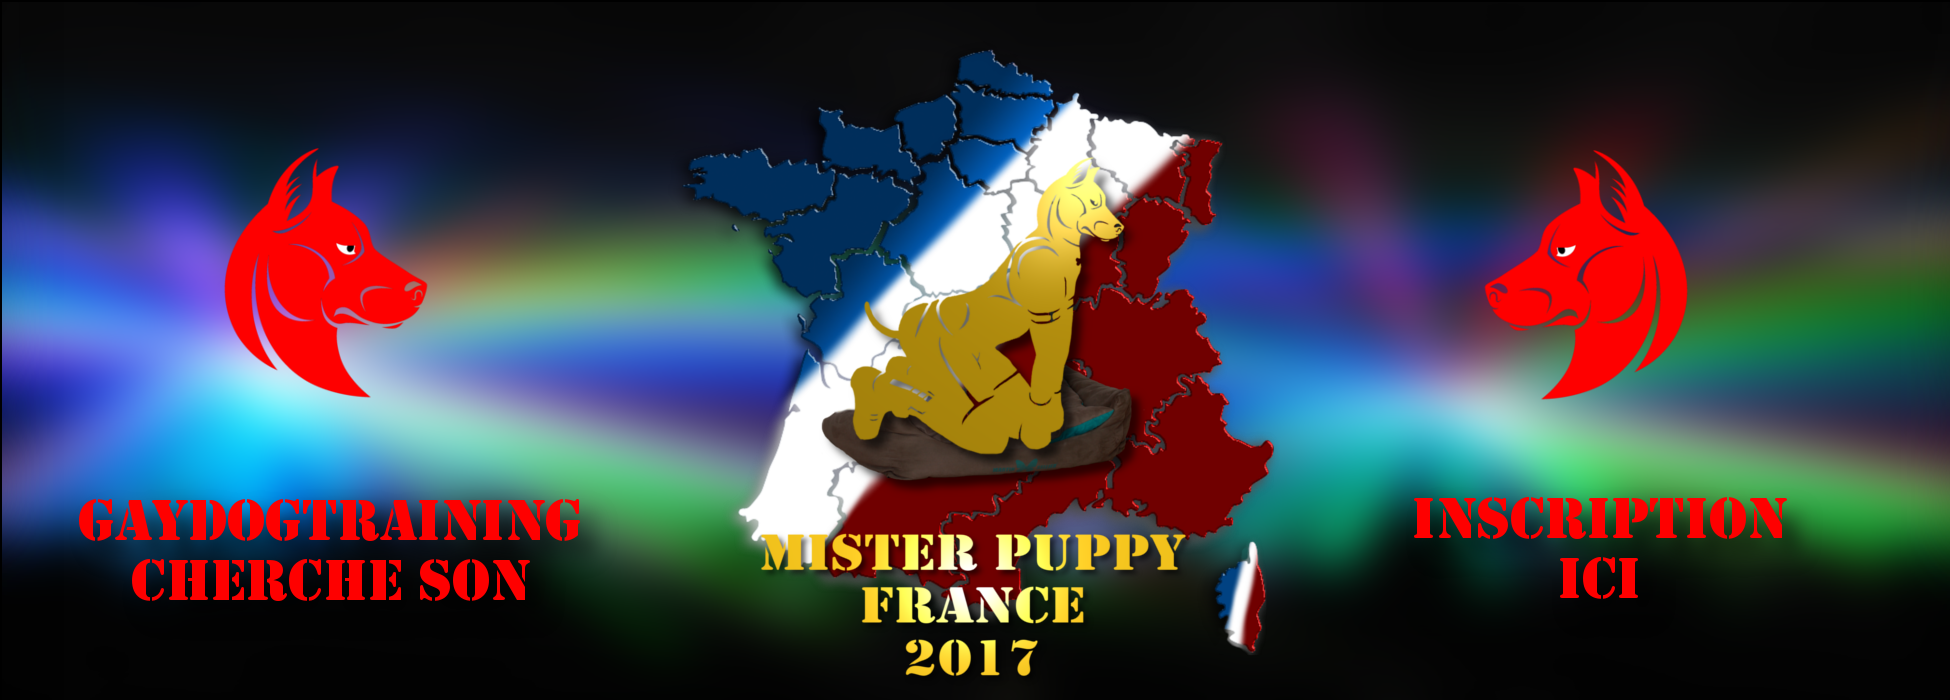 Affiches : Mister Puppy France 2017